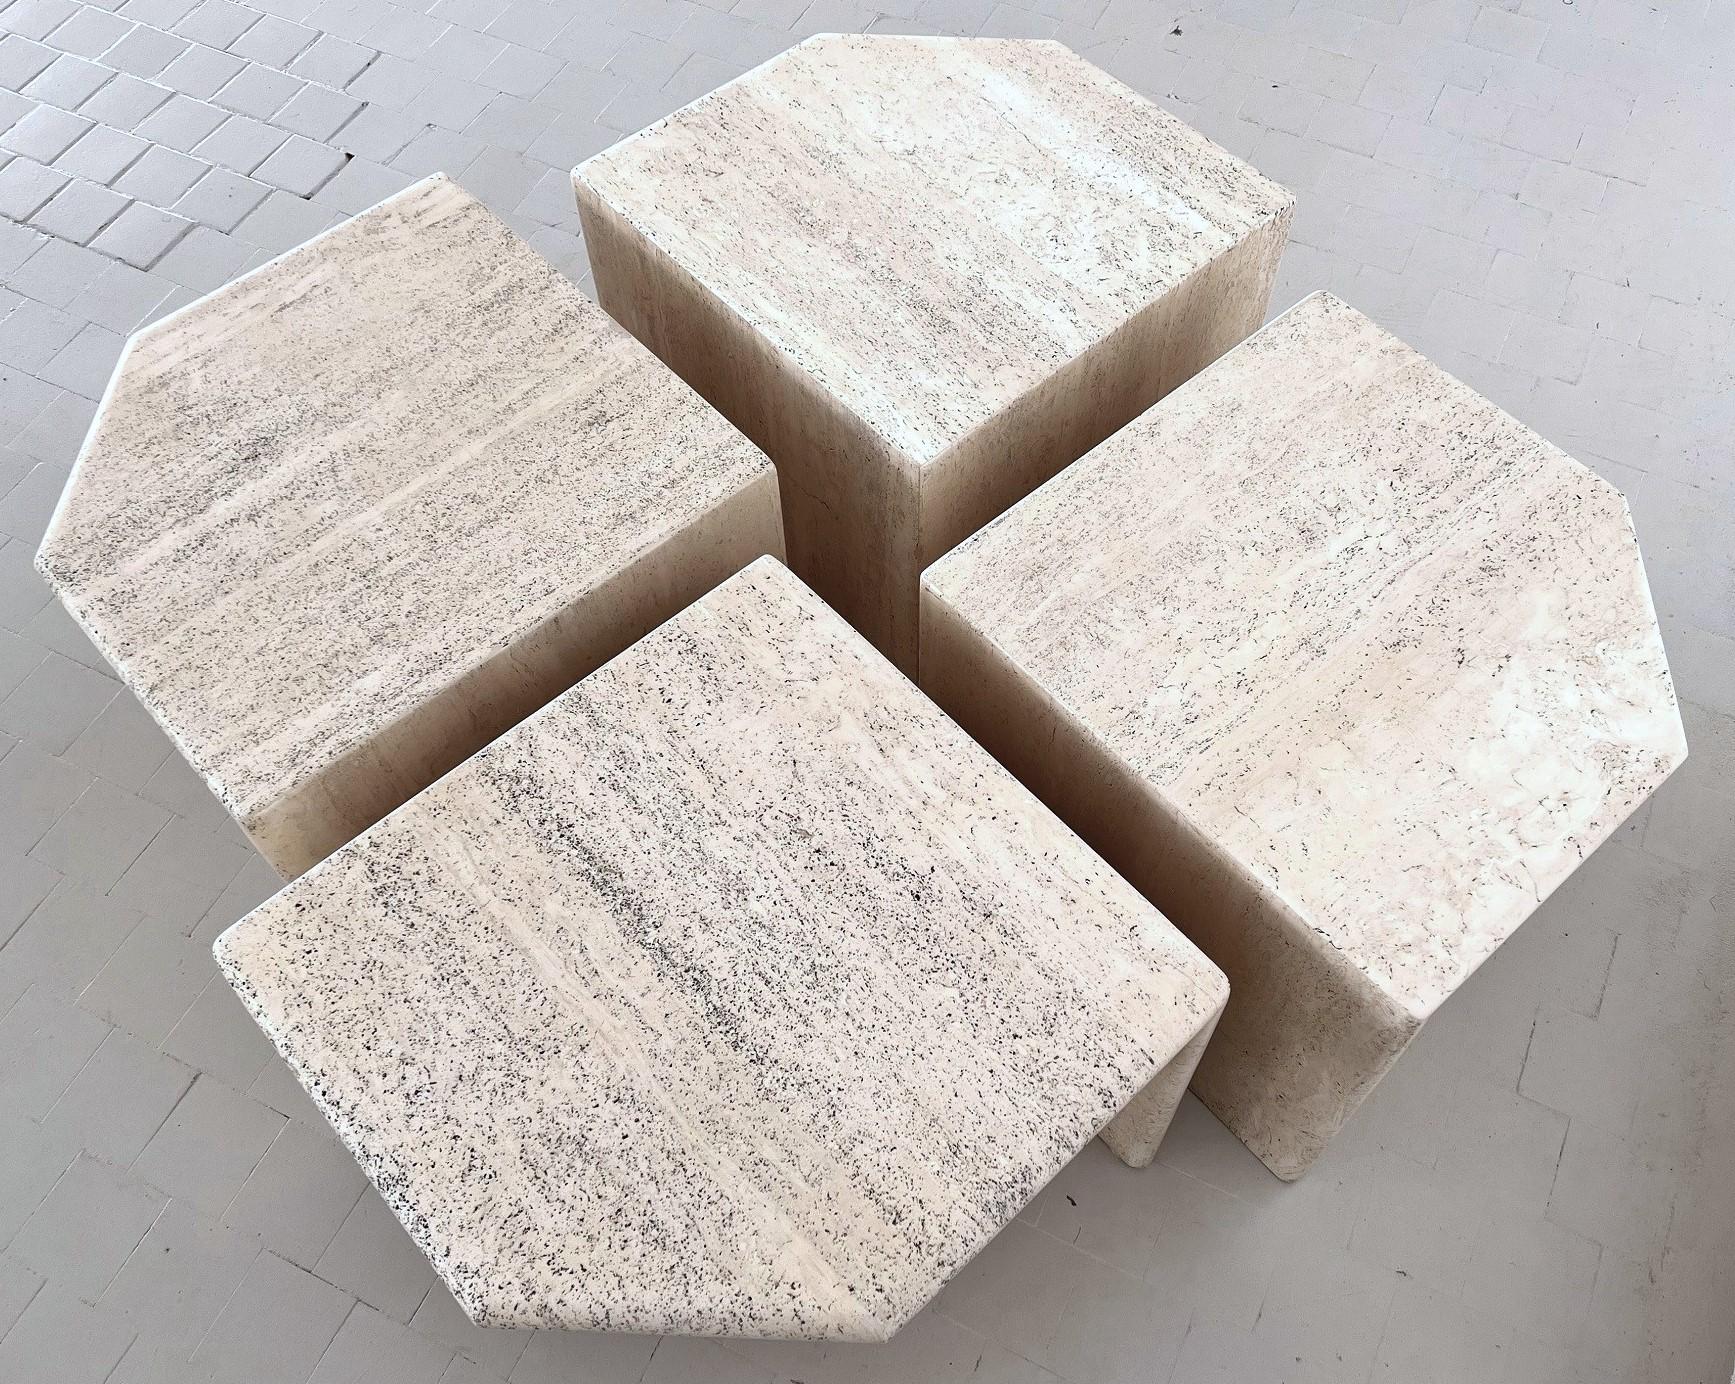 Italian Midcentury Sectional Travertine Marble Coffee Table of Four Pieces, 1970 For Sale 6